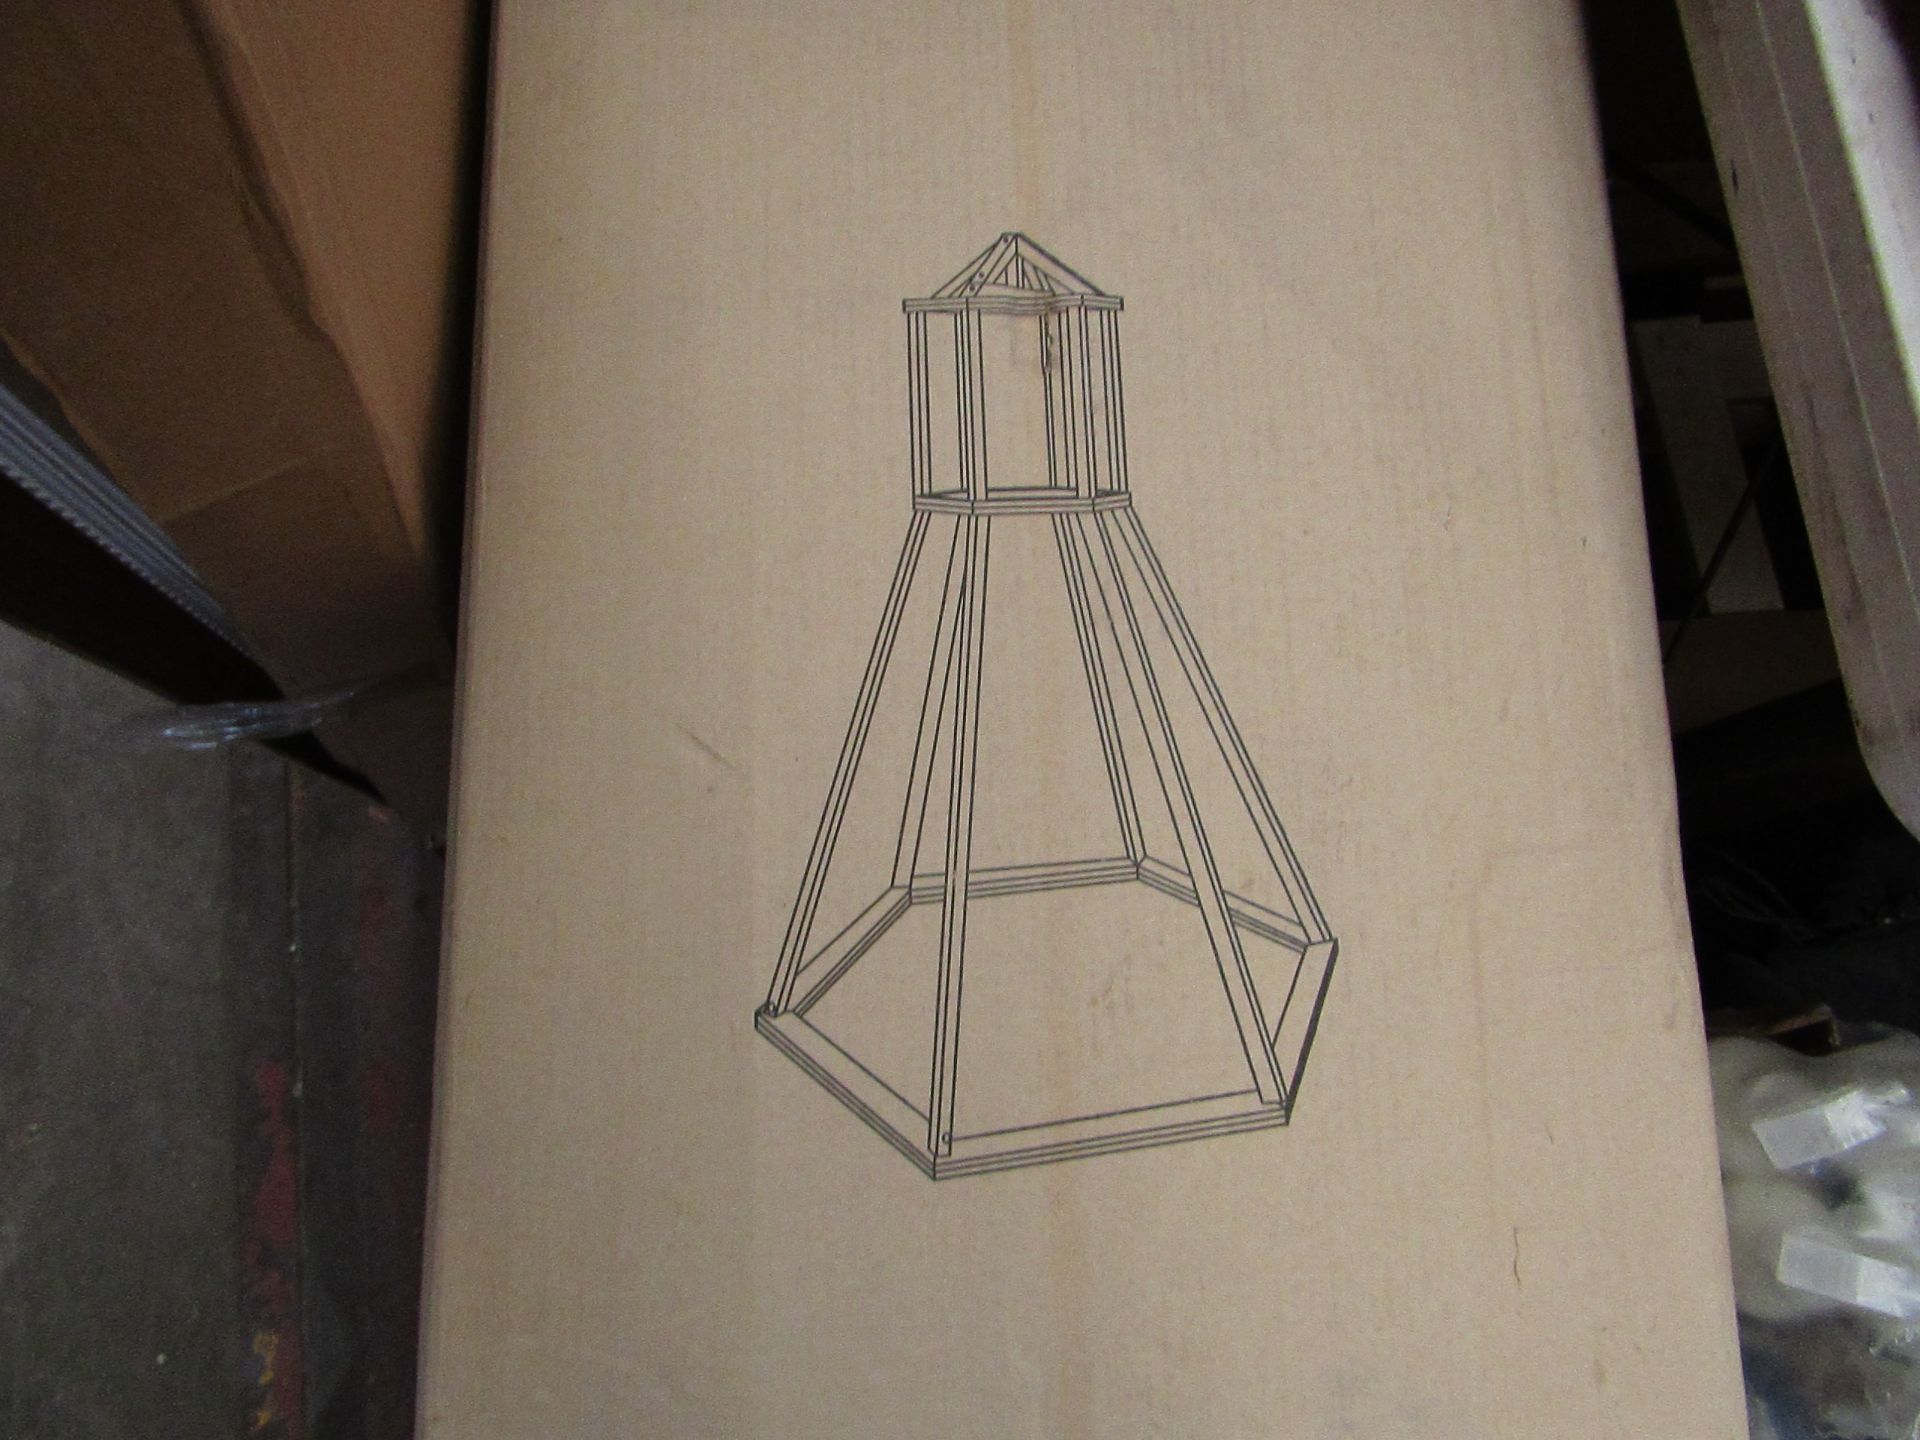 MountRose - Children's Lighthouse/Teepee - 1065x440x82mm - Item Only Contains Lighthouse Frame, Does